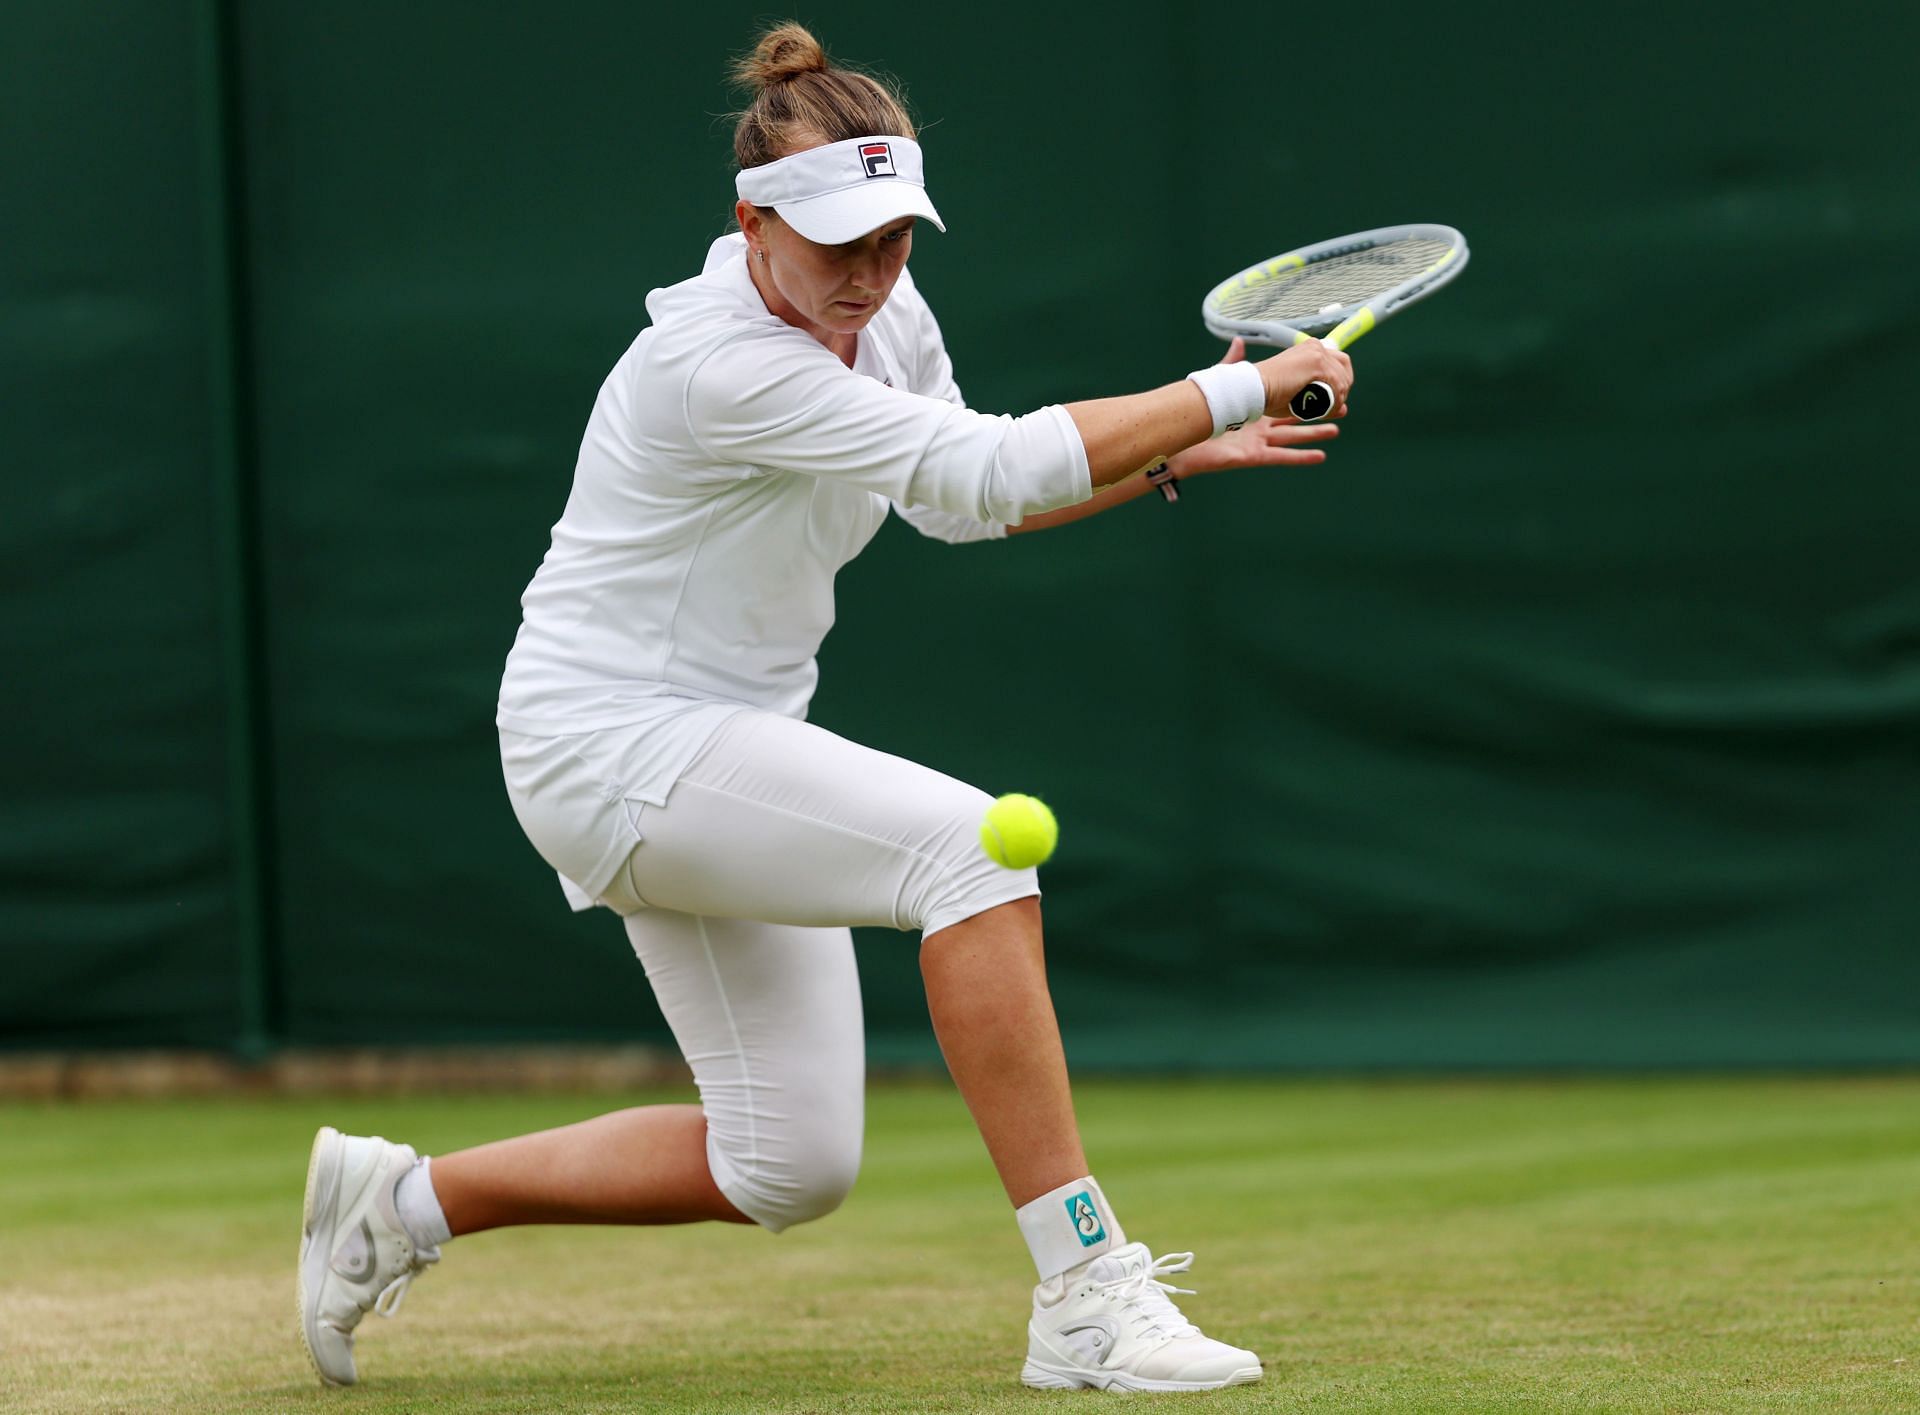 Krejcikova is likely to reach the fourth round at Wimbledon for the second year in a row